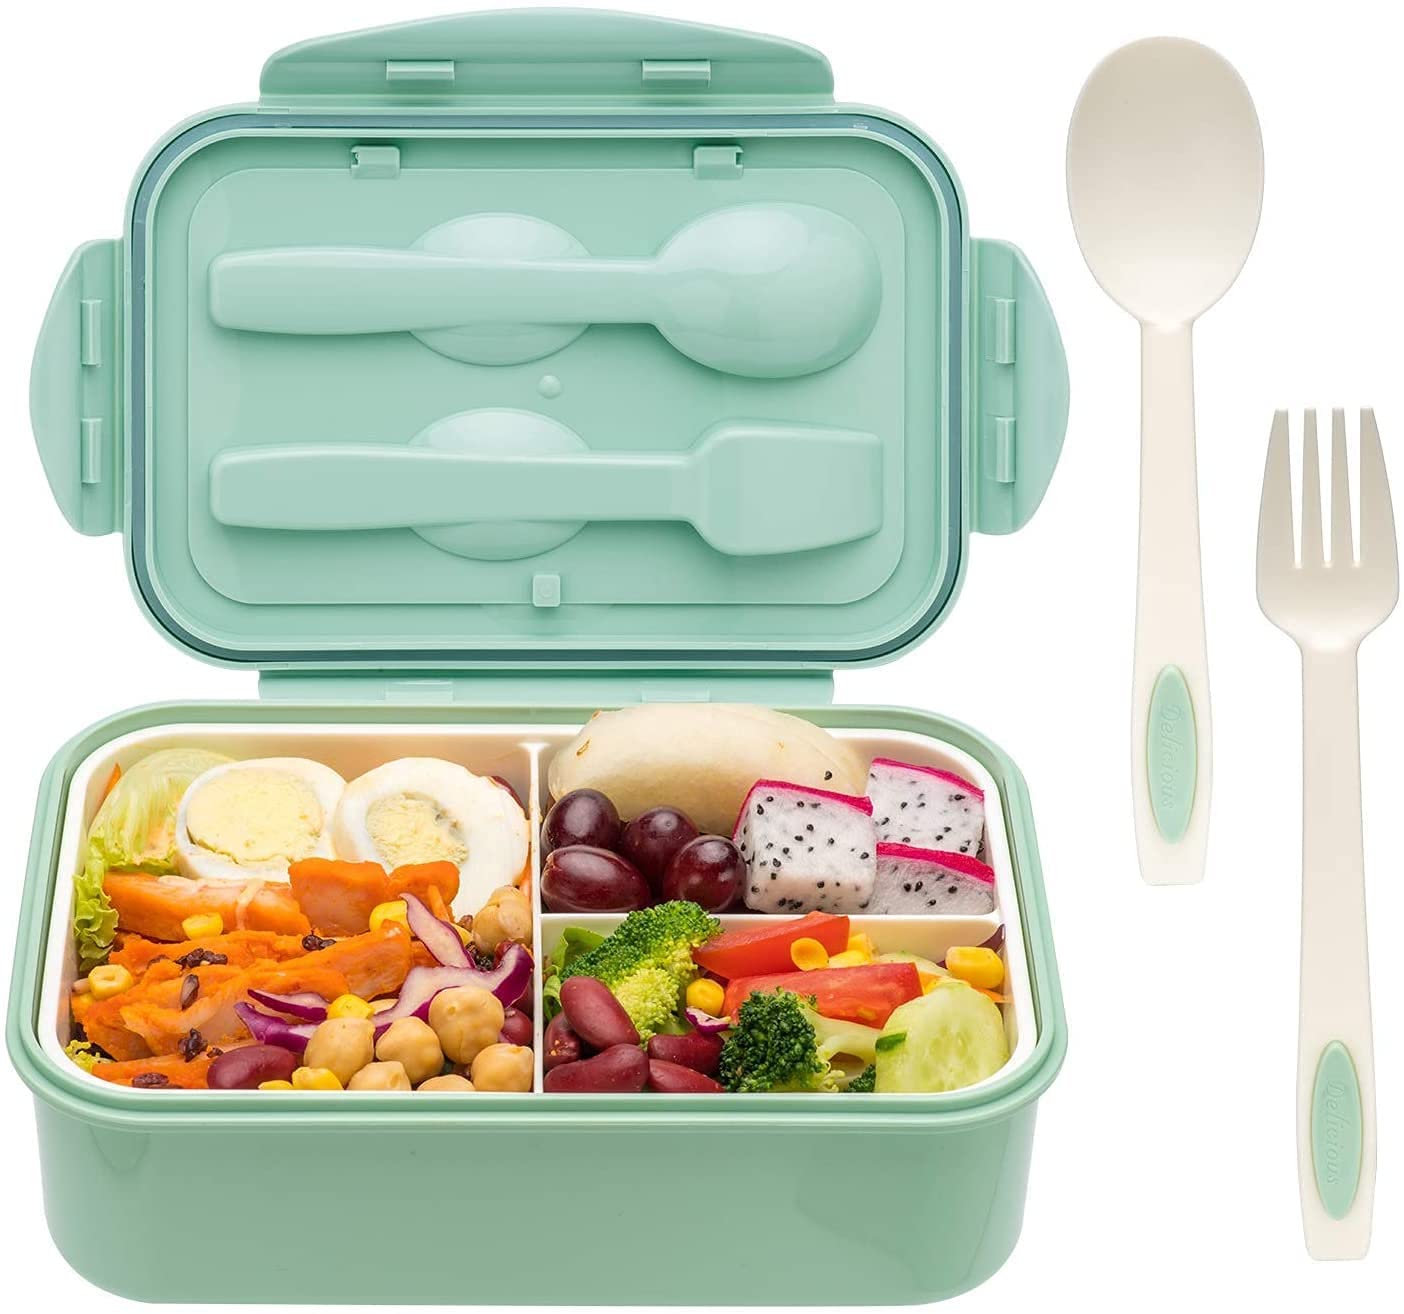 Leak Proof 3 Compartment Lunch Box Reusable Microwave Freezer Safe Food Containers with Spoon for Adults and Kids